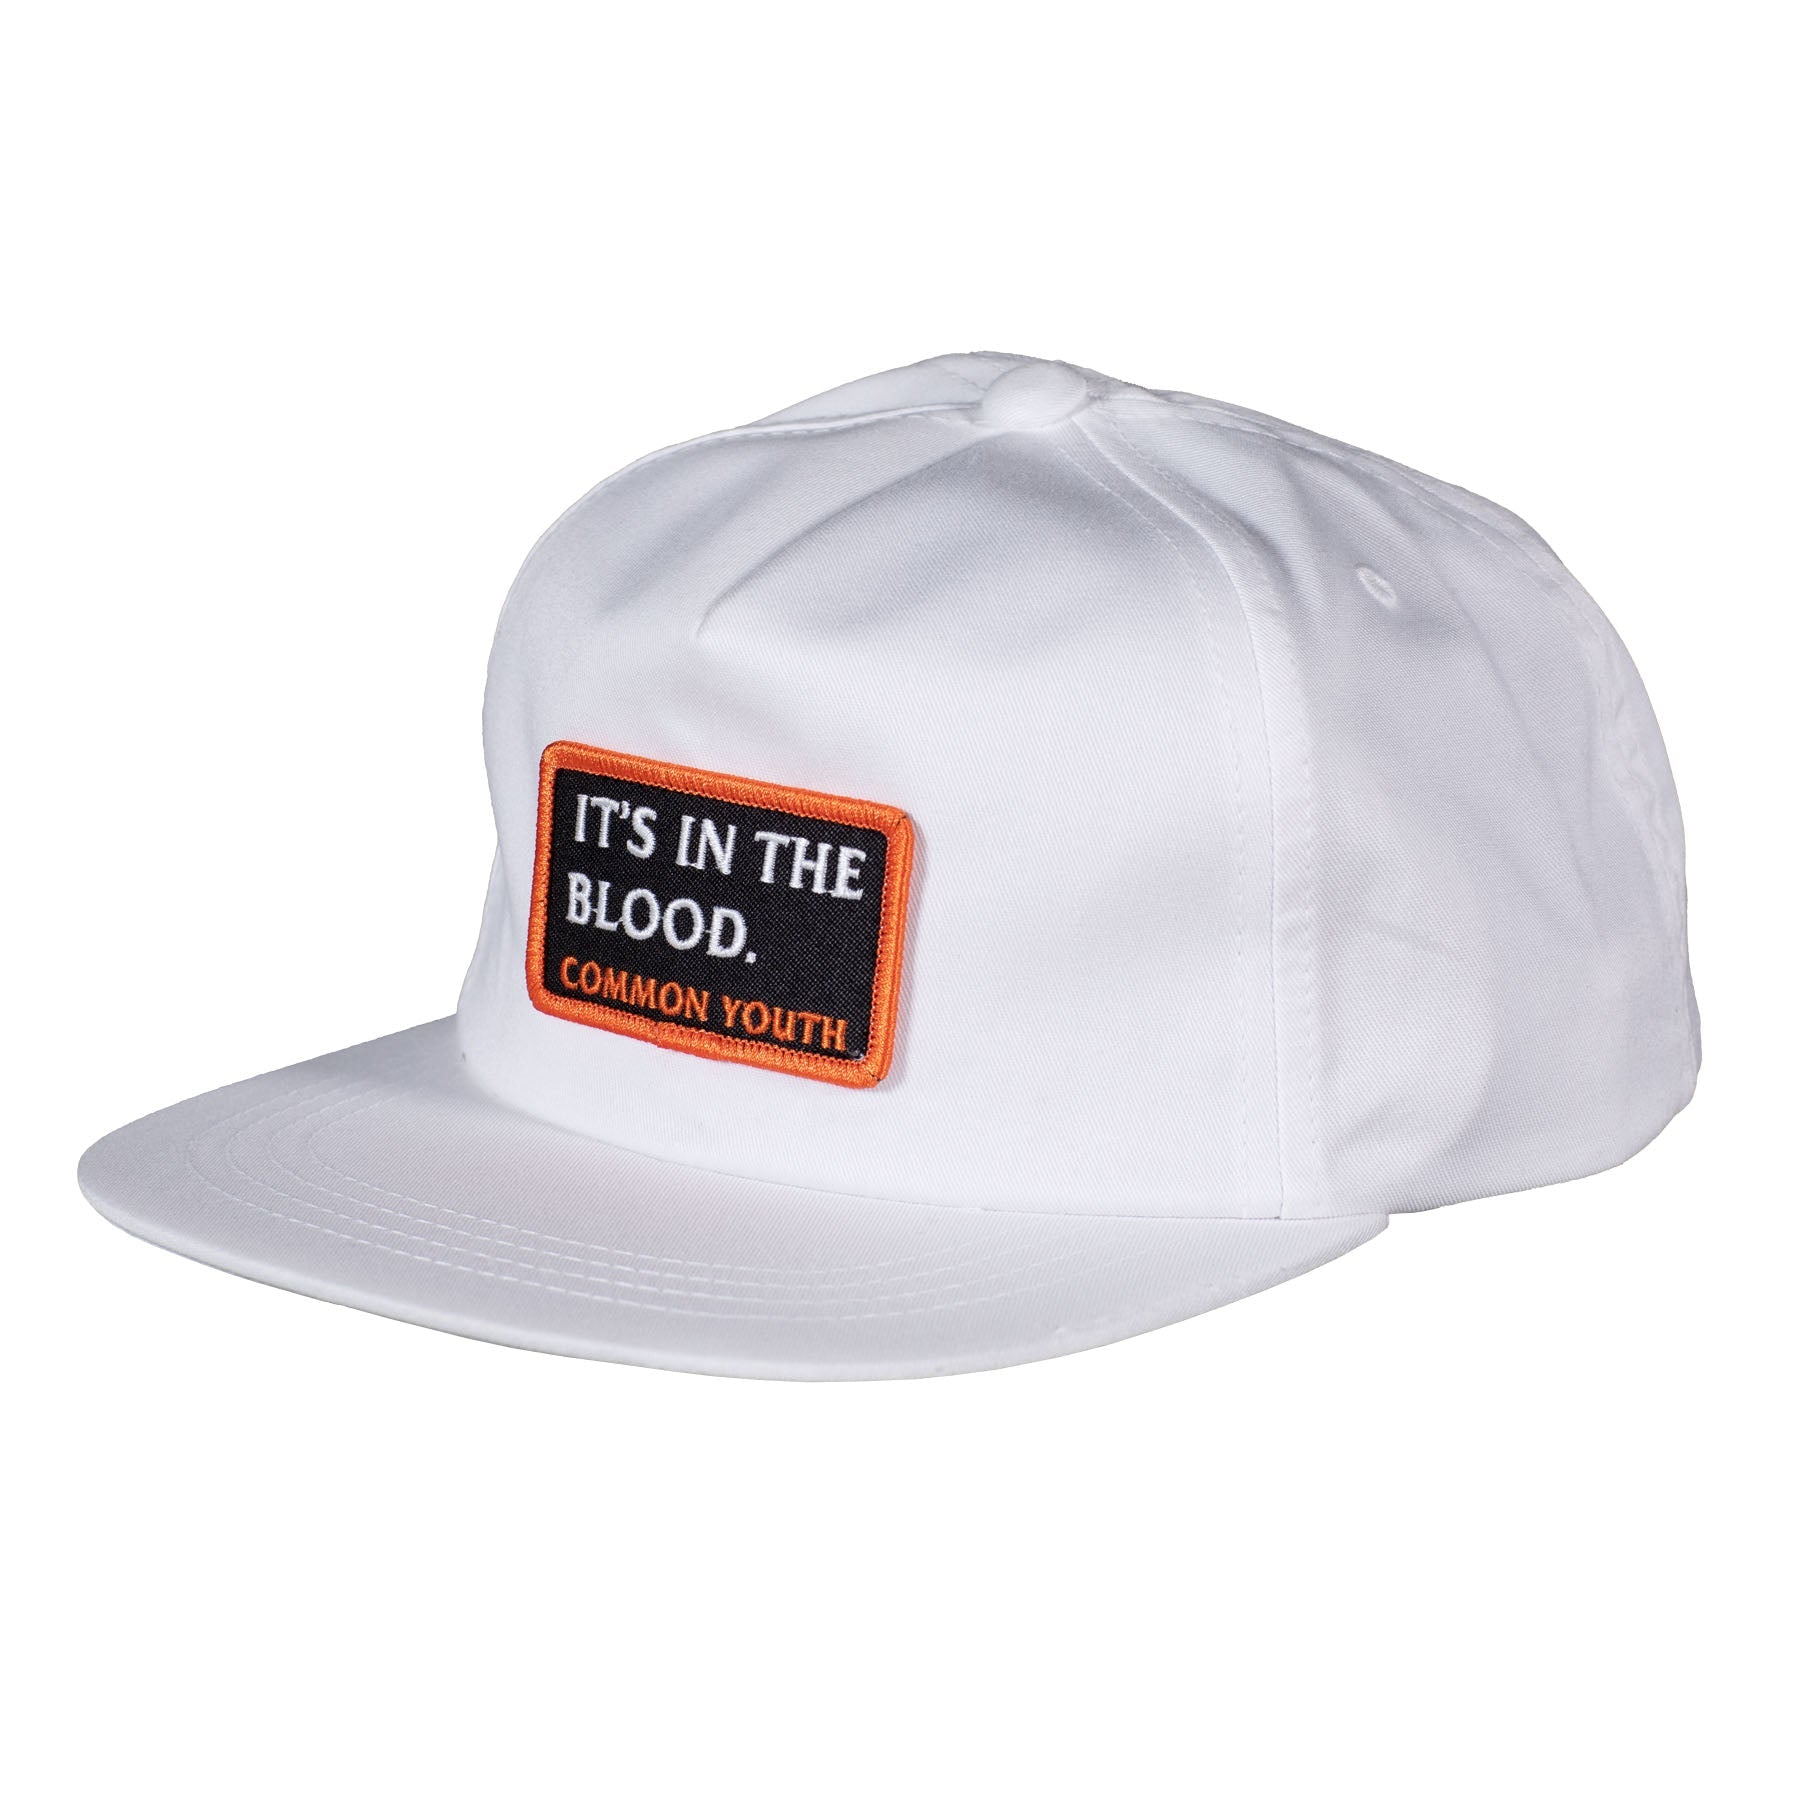 IN THE BLOOD CAP - commonyouthbrand